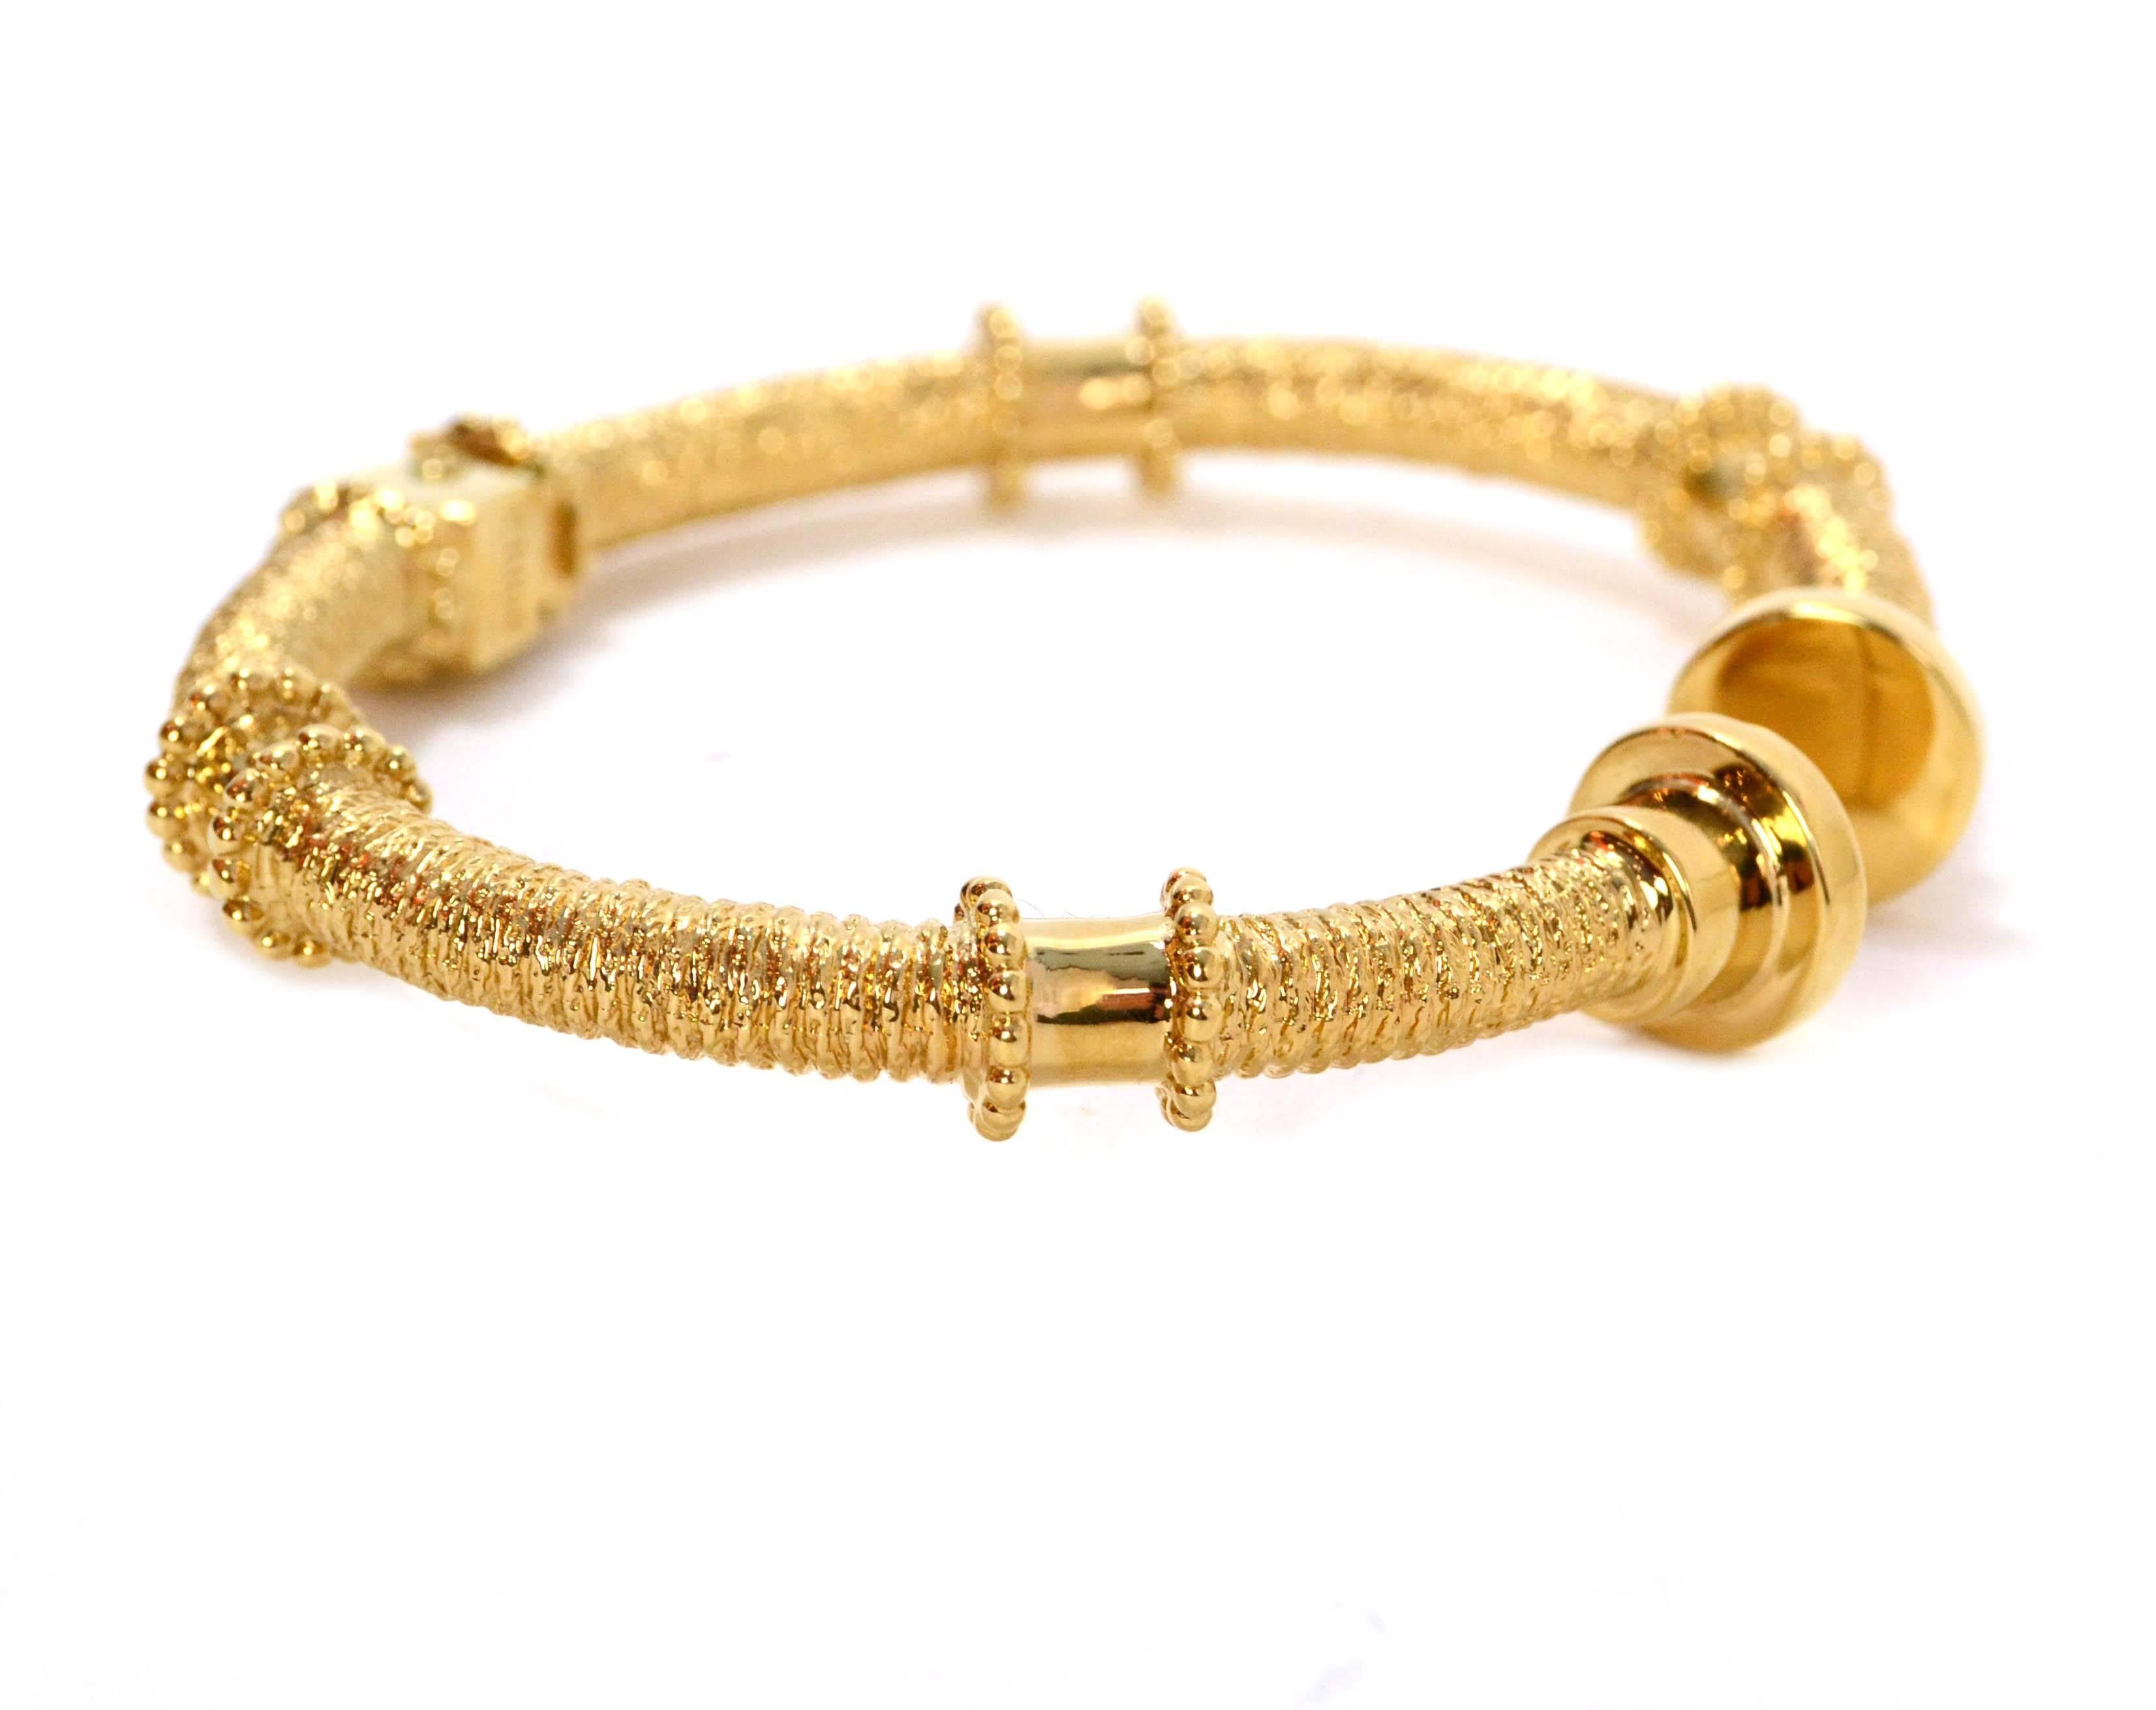 Chloe Textured Gold Frankie Anklet
Features features little dotted cylinders throughout and textured metal
Made In: Italy
Color: Goldtone
Materials: Metal
Closure: Hinge
Stamp: Chloe Made in Italy 
Retail Price: $630 + tax
Overall Condition: